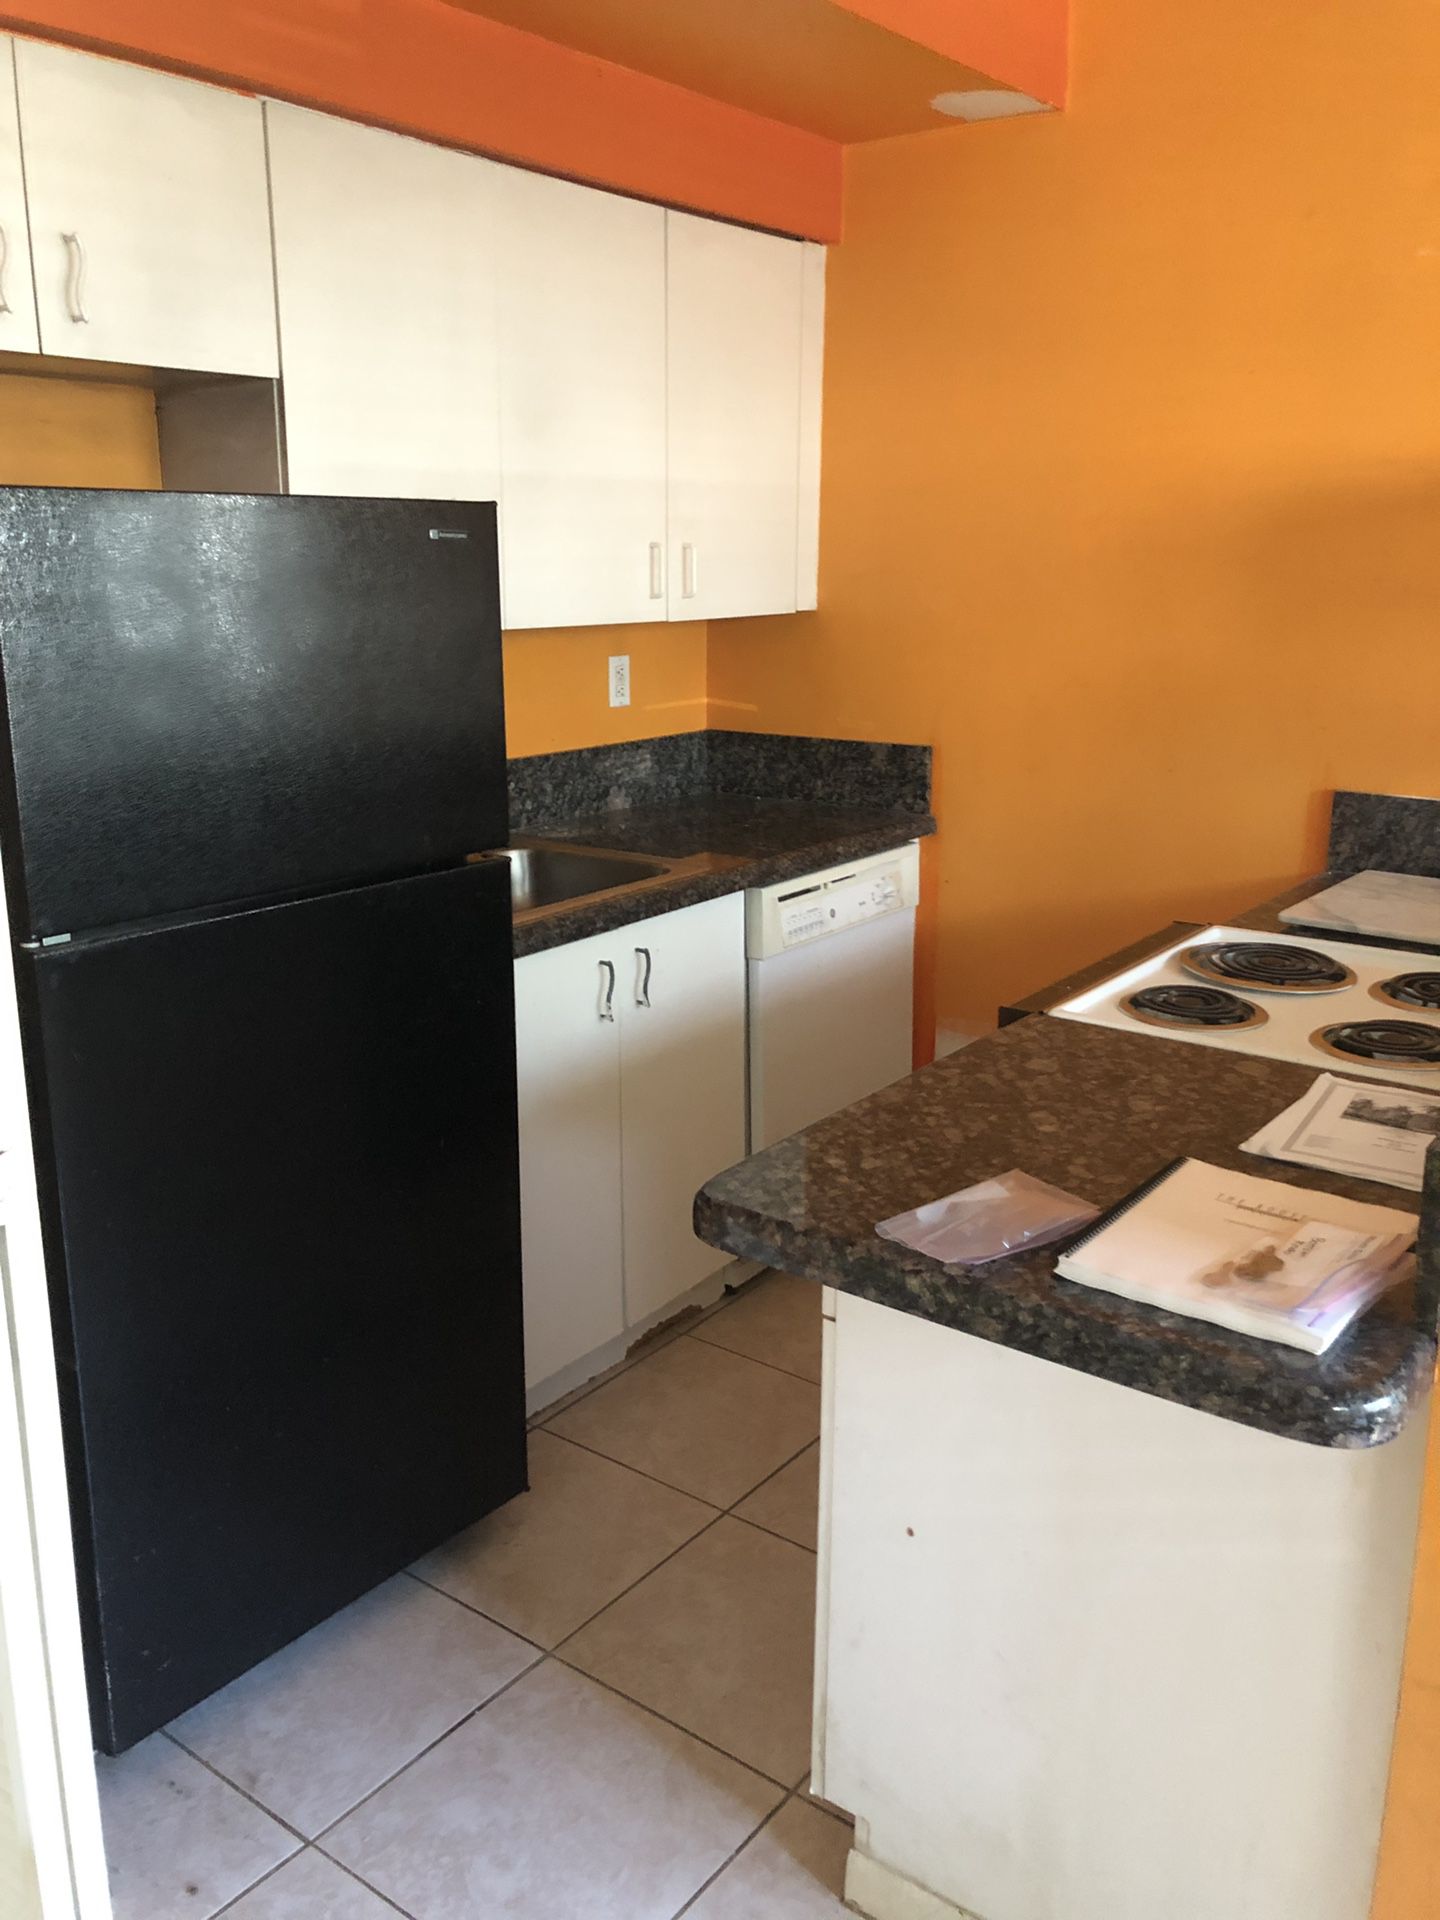 Kitchen cabinets and appliances 200$